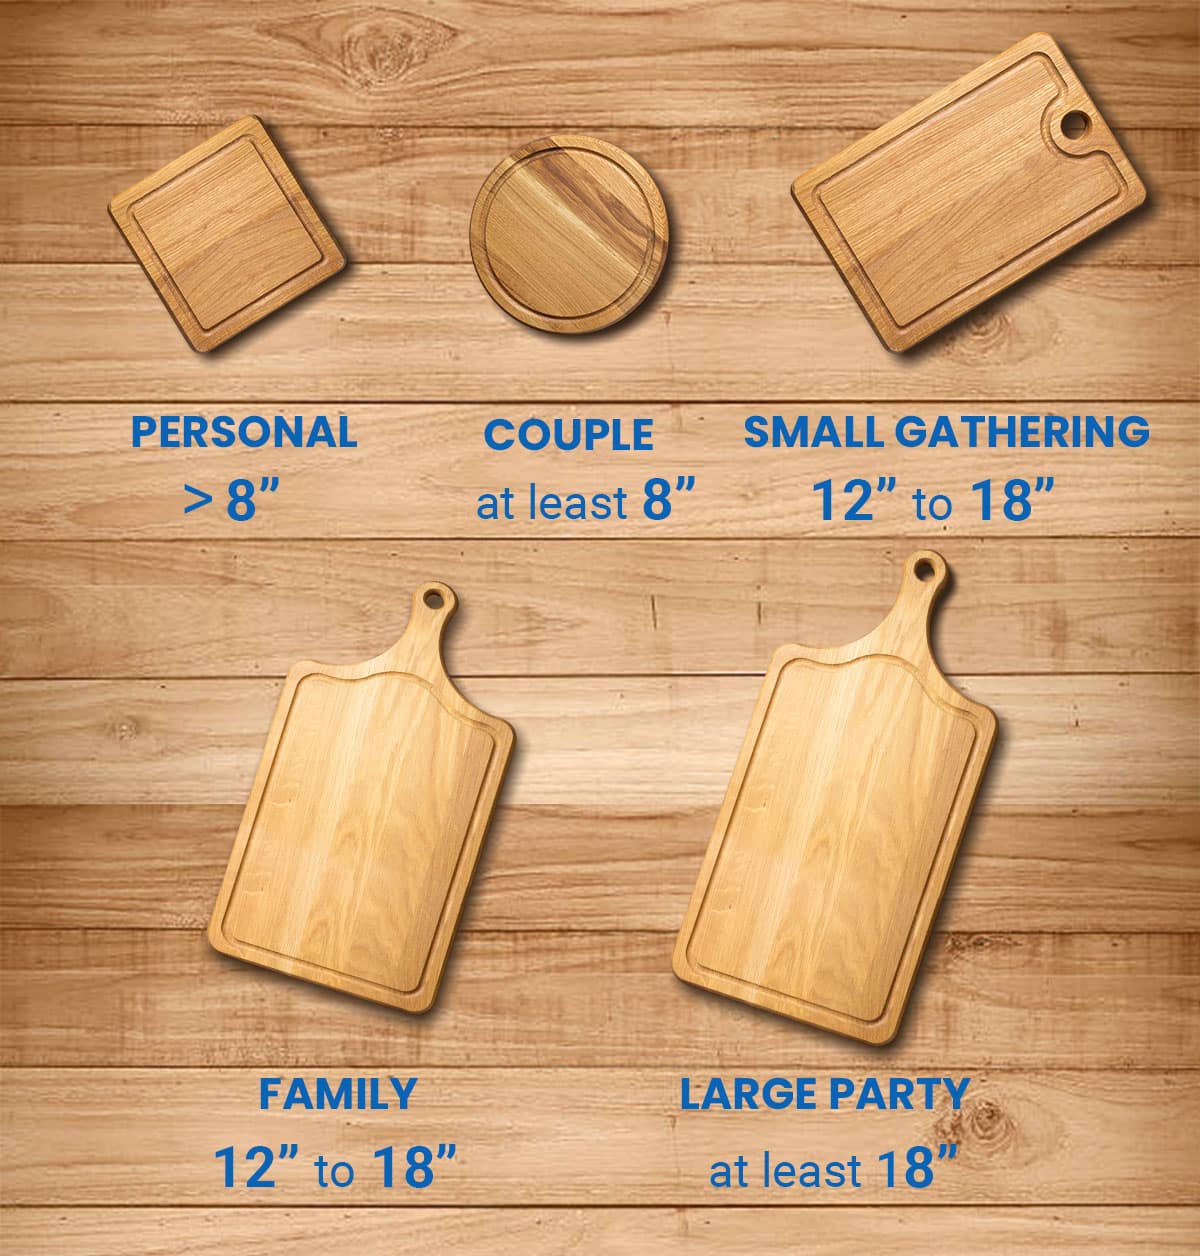 Different charcuterie board sizes